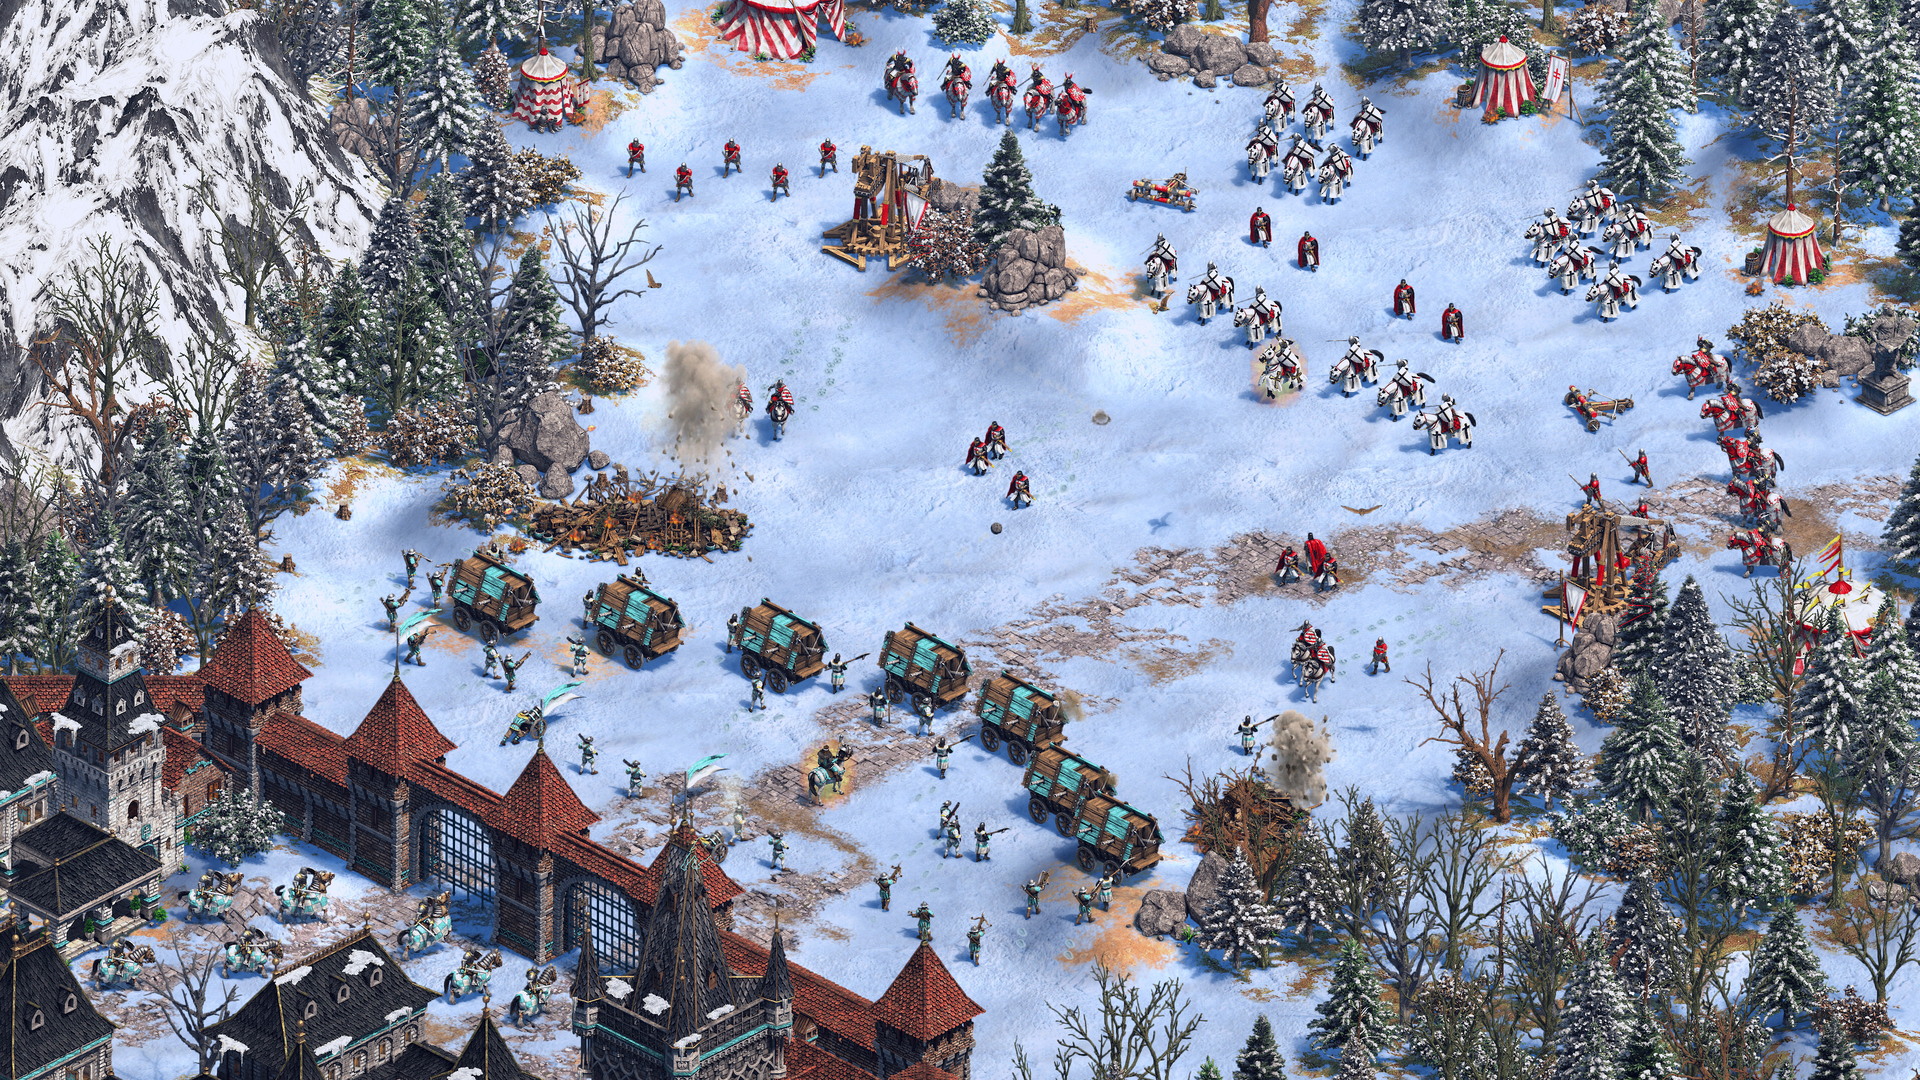 Age of Empires II: Definitive Edition - Dawn of the Dukes - screenshot 2